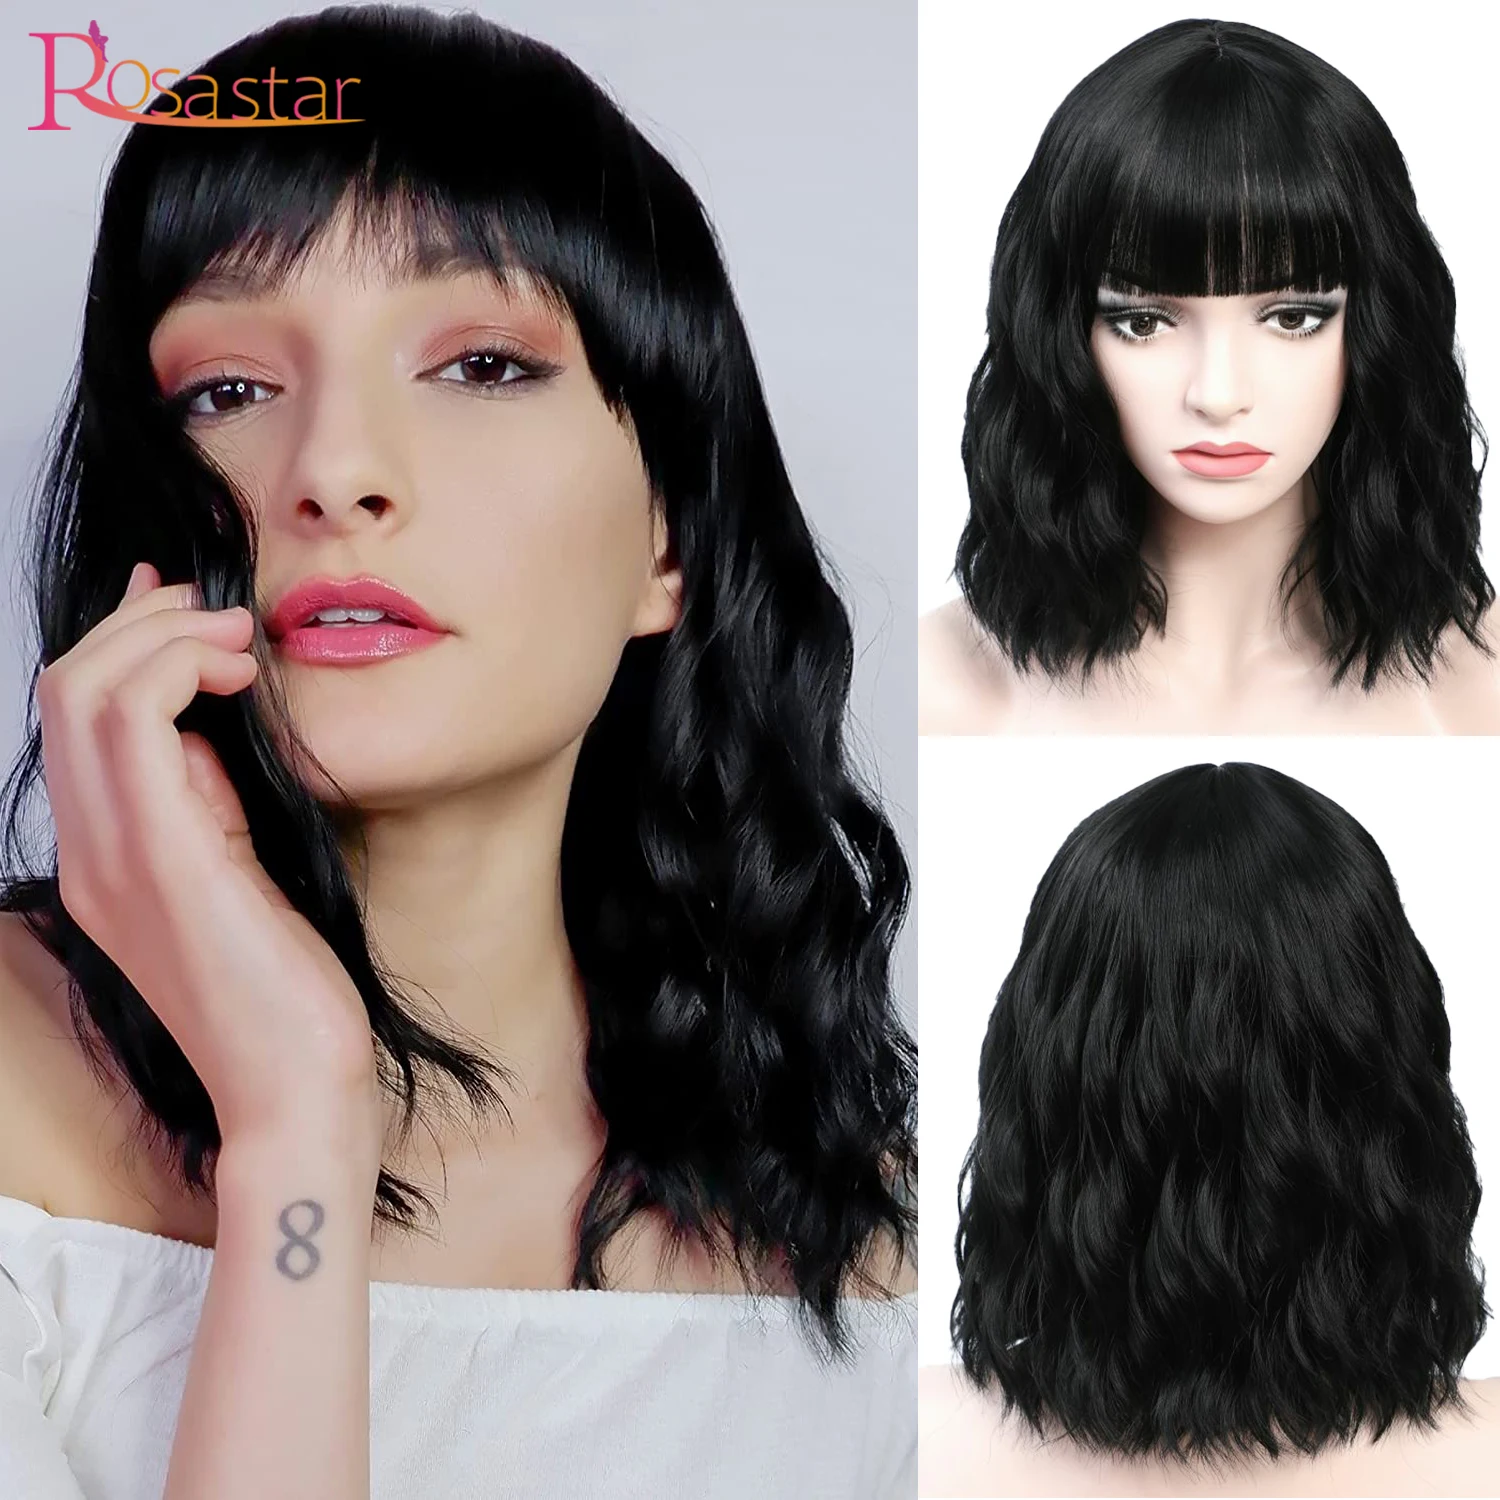 

Bob Wig Shoulder Length Black Wavy Wigs with Air Bangs for Women 14" Curly for Girl Natural Looking Short Synthetic Wigs Daily